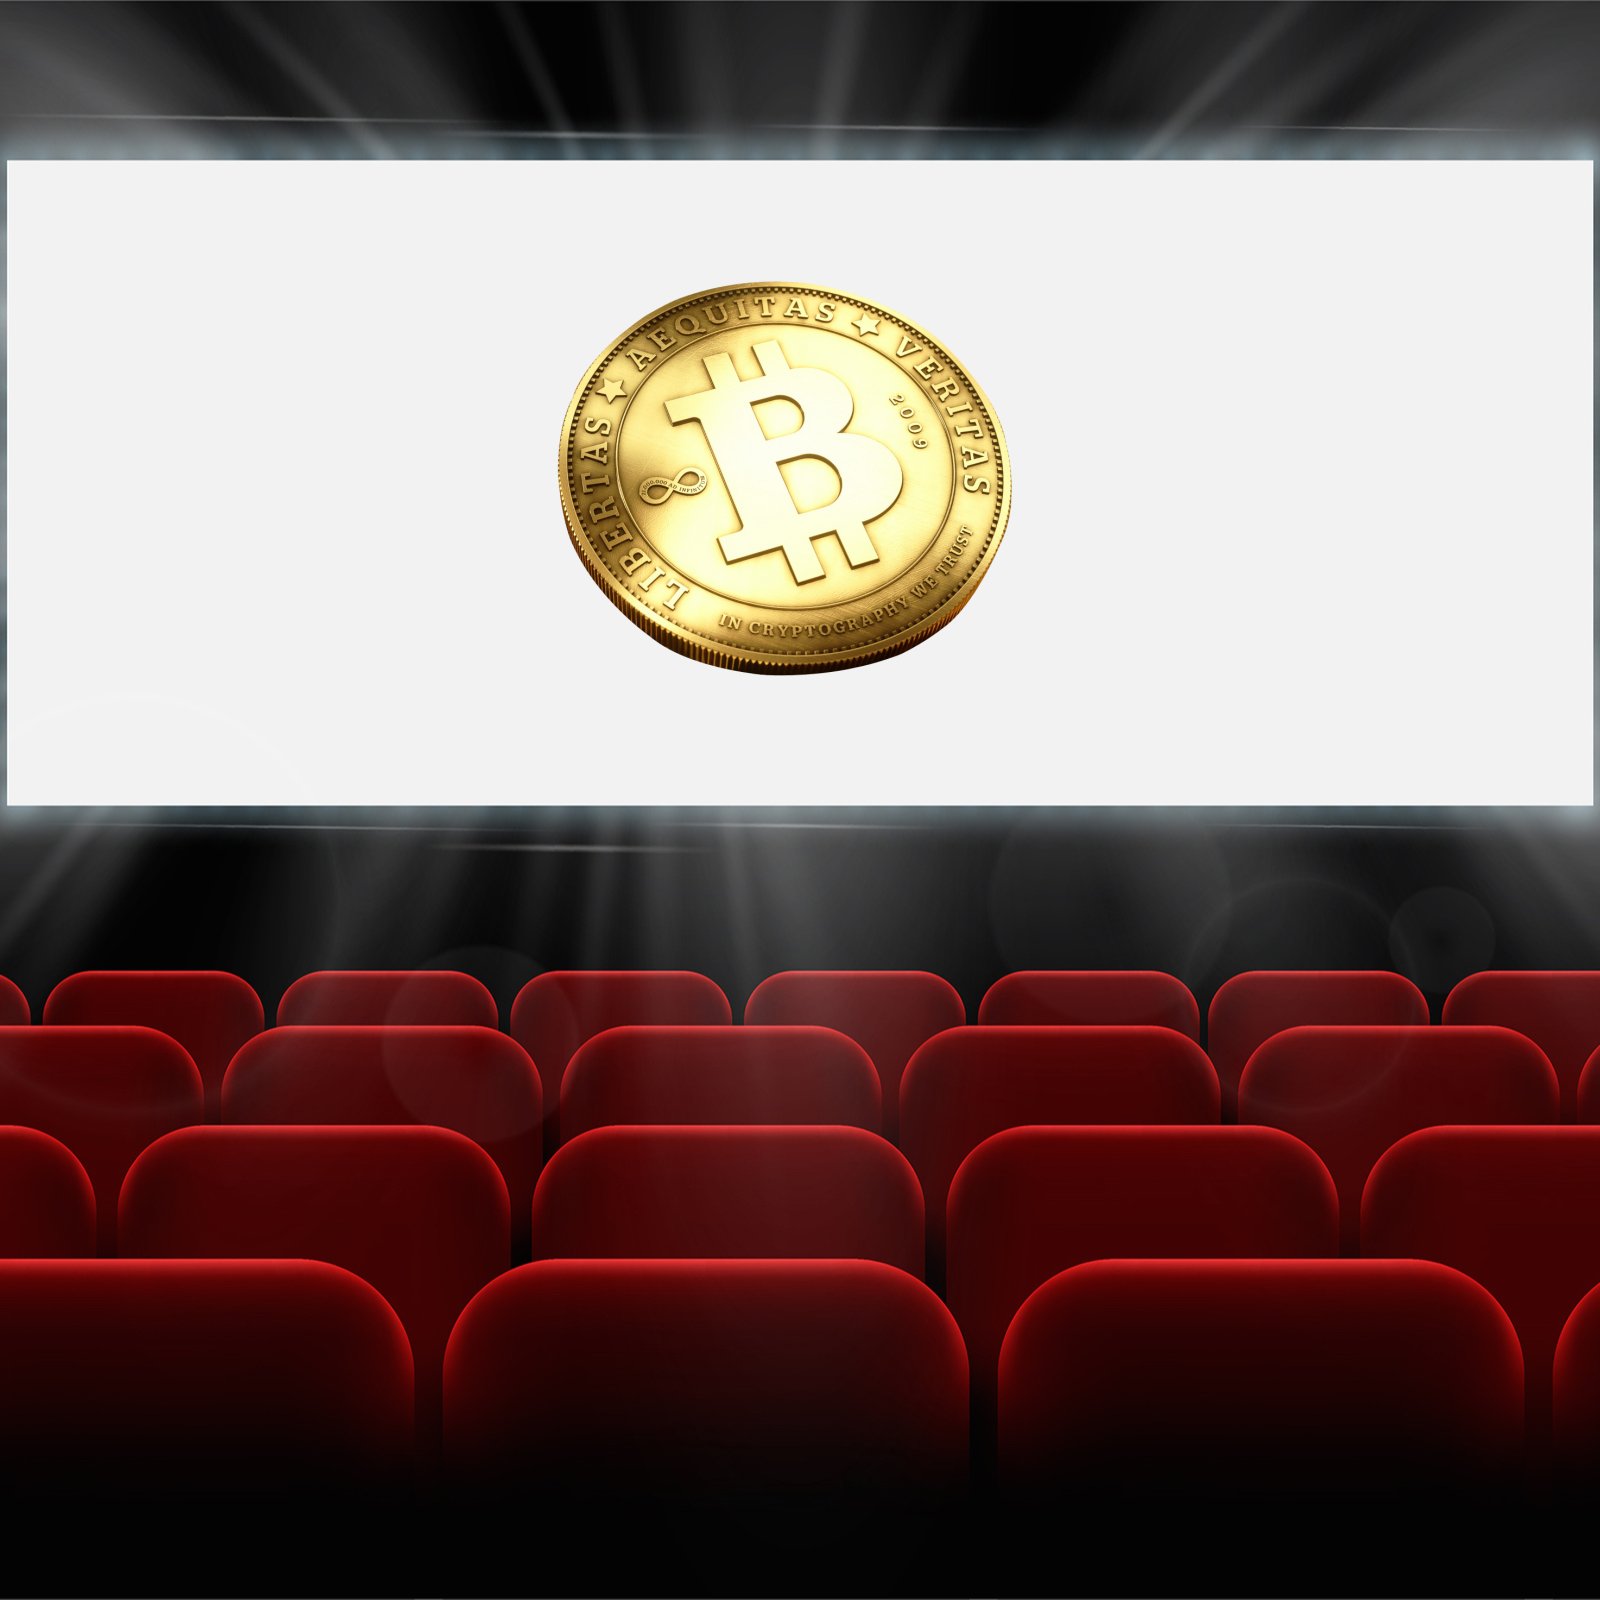 Cryptocurrency Gets Its Own Comedy In “Bitcoin” the Movie